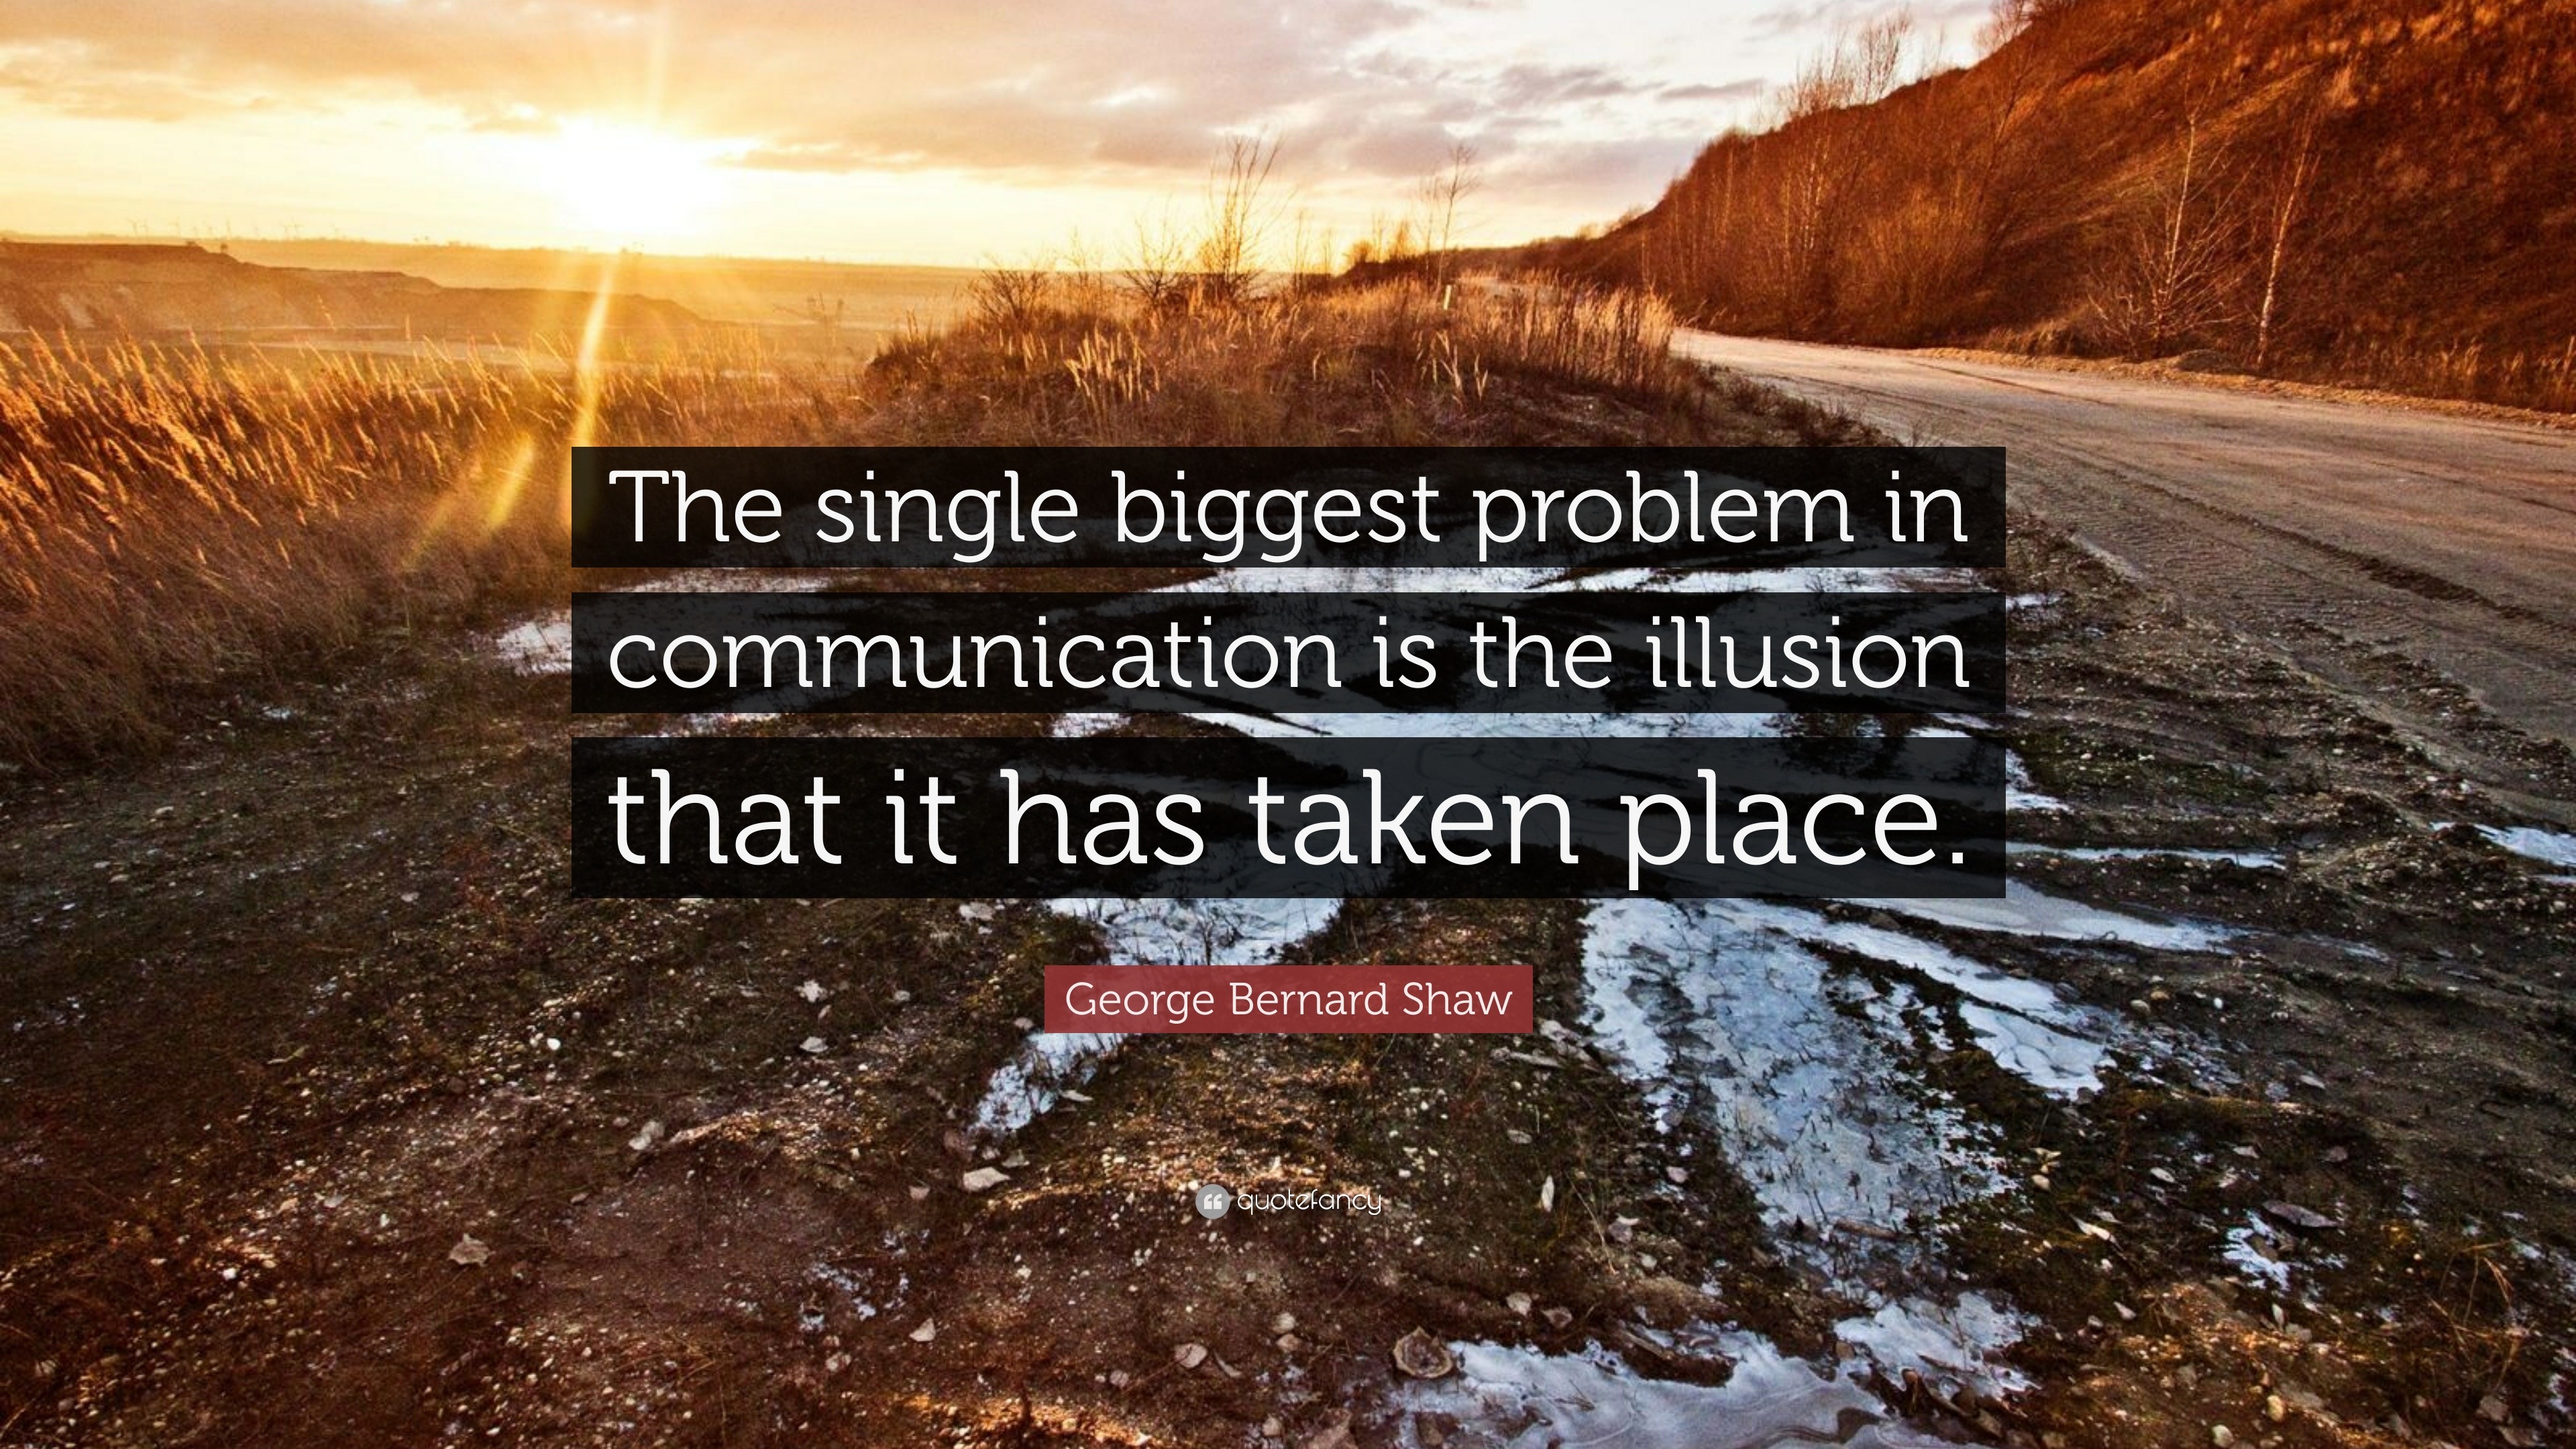 the single biggest problem in communication is the illusion that it has taken place source